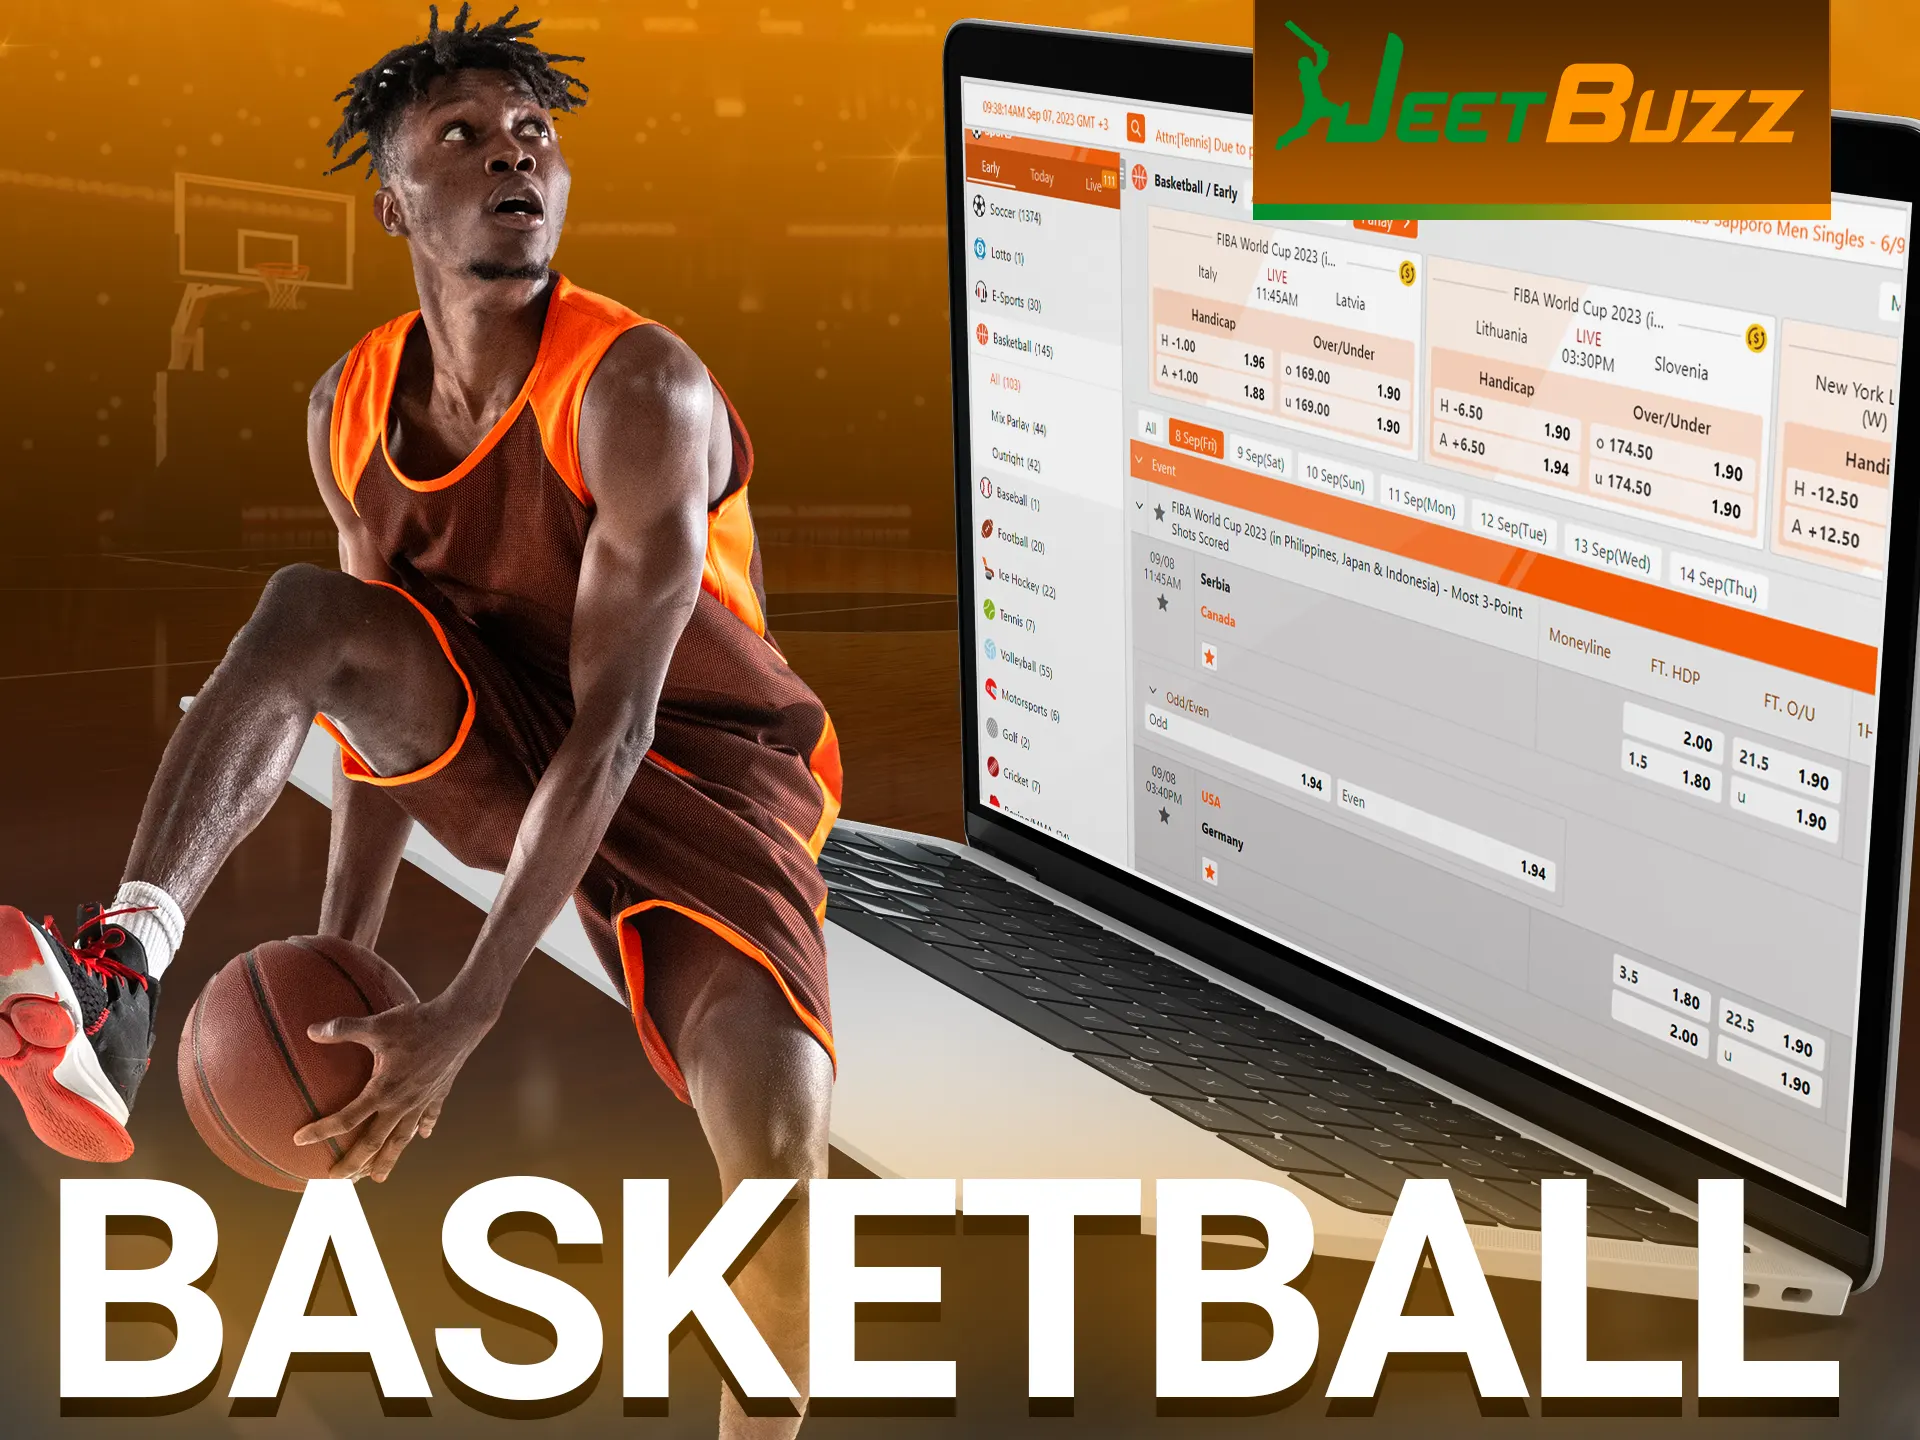 Place your basketball bets on Jeetbuzz.